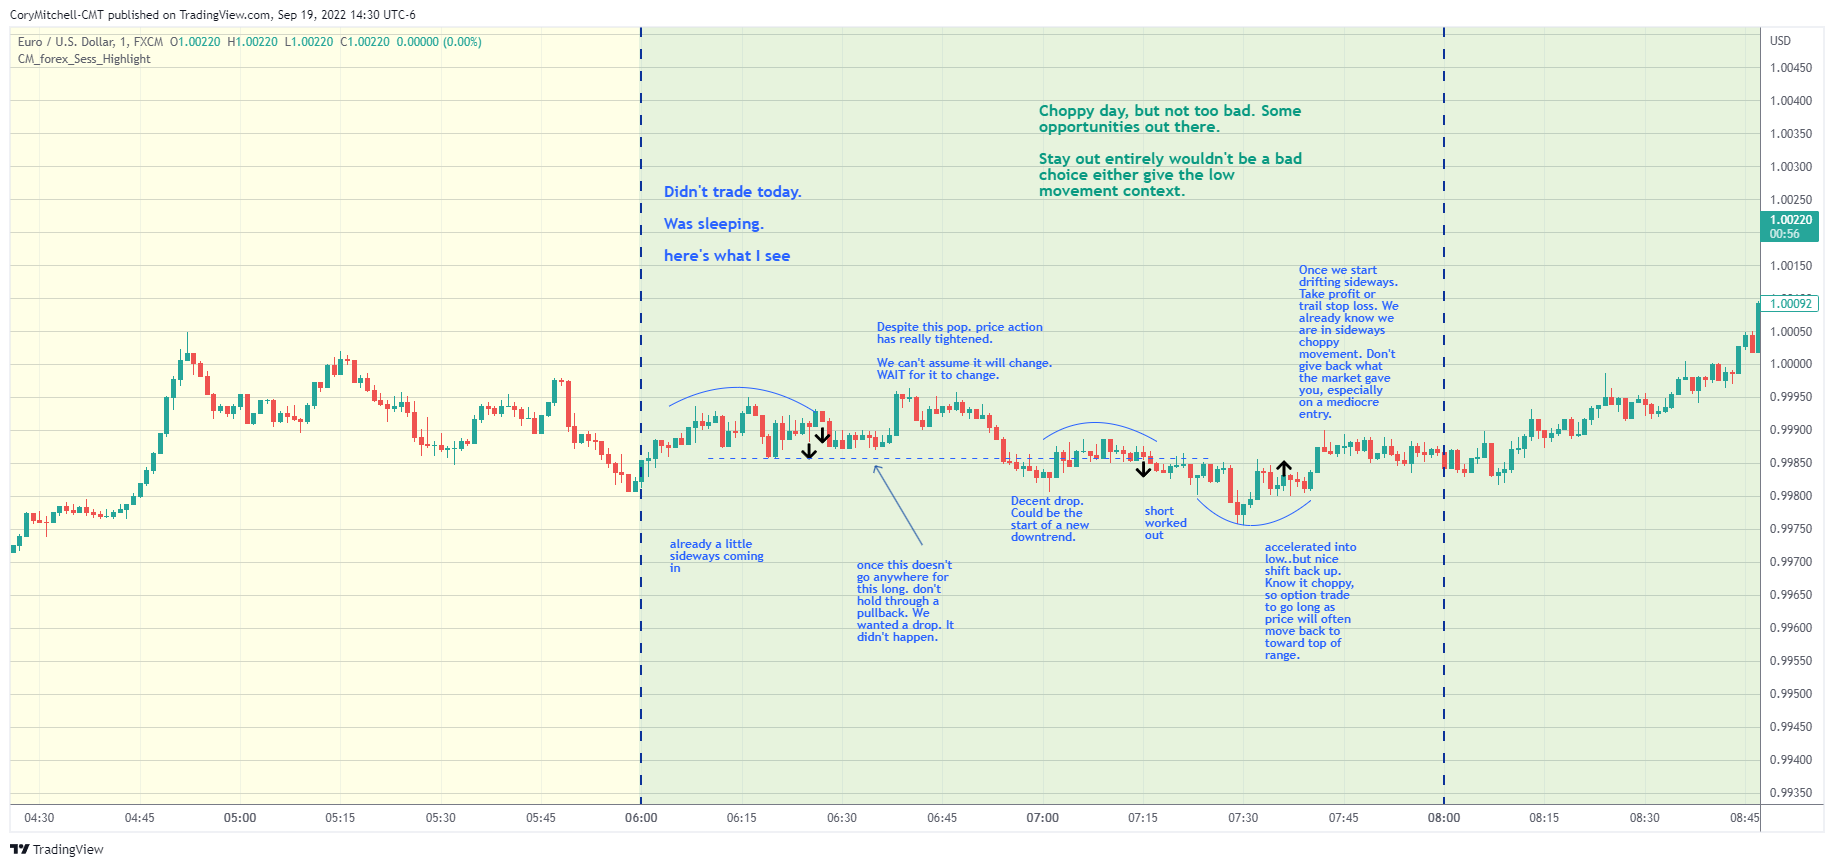 EURUSD day trading strategy examples Sept 19